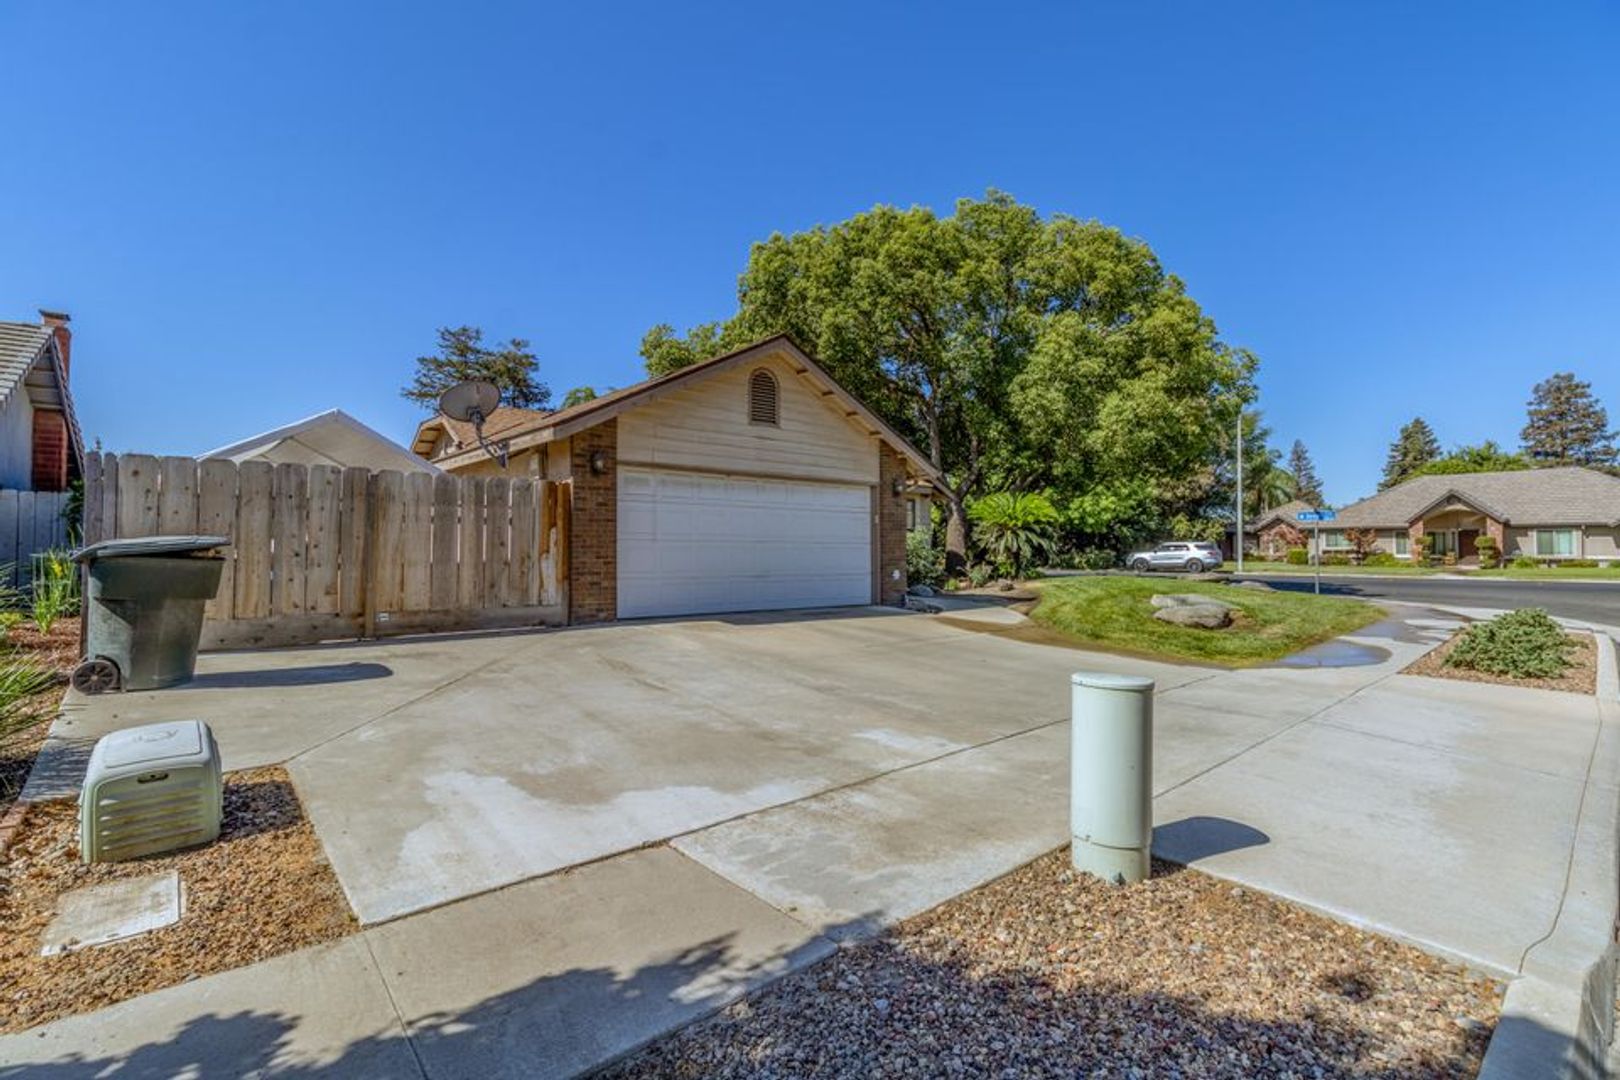 407 HOOVER AVE - 3 BEDROOM 2 BATH - TULARE